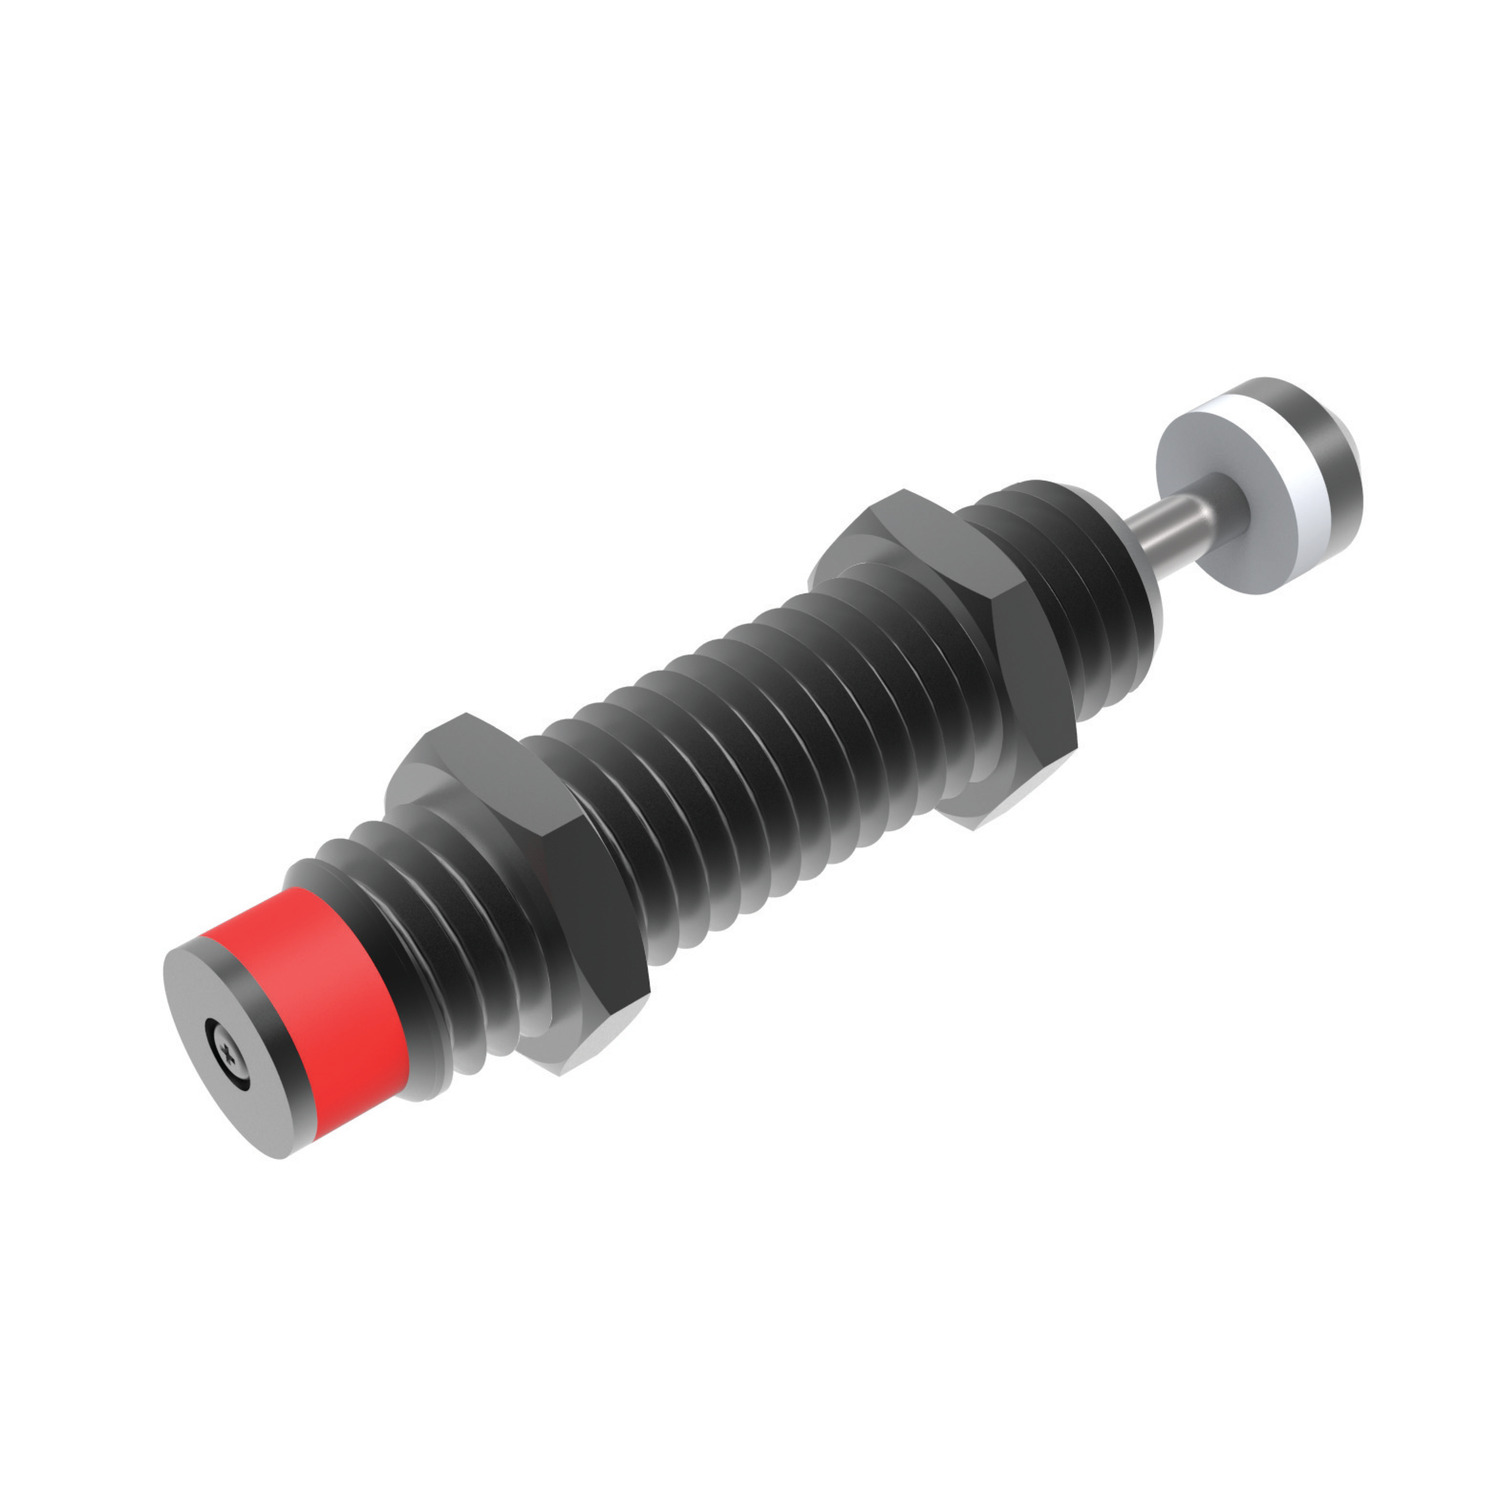 68001 Minature Shock Absorbers, Self Compensating